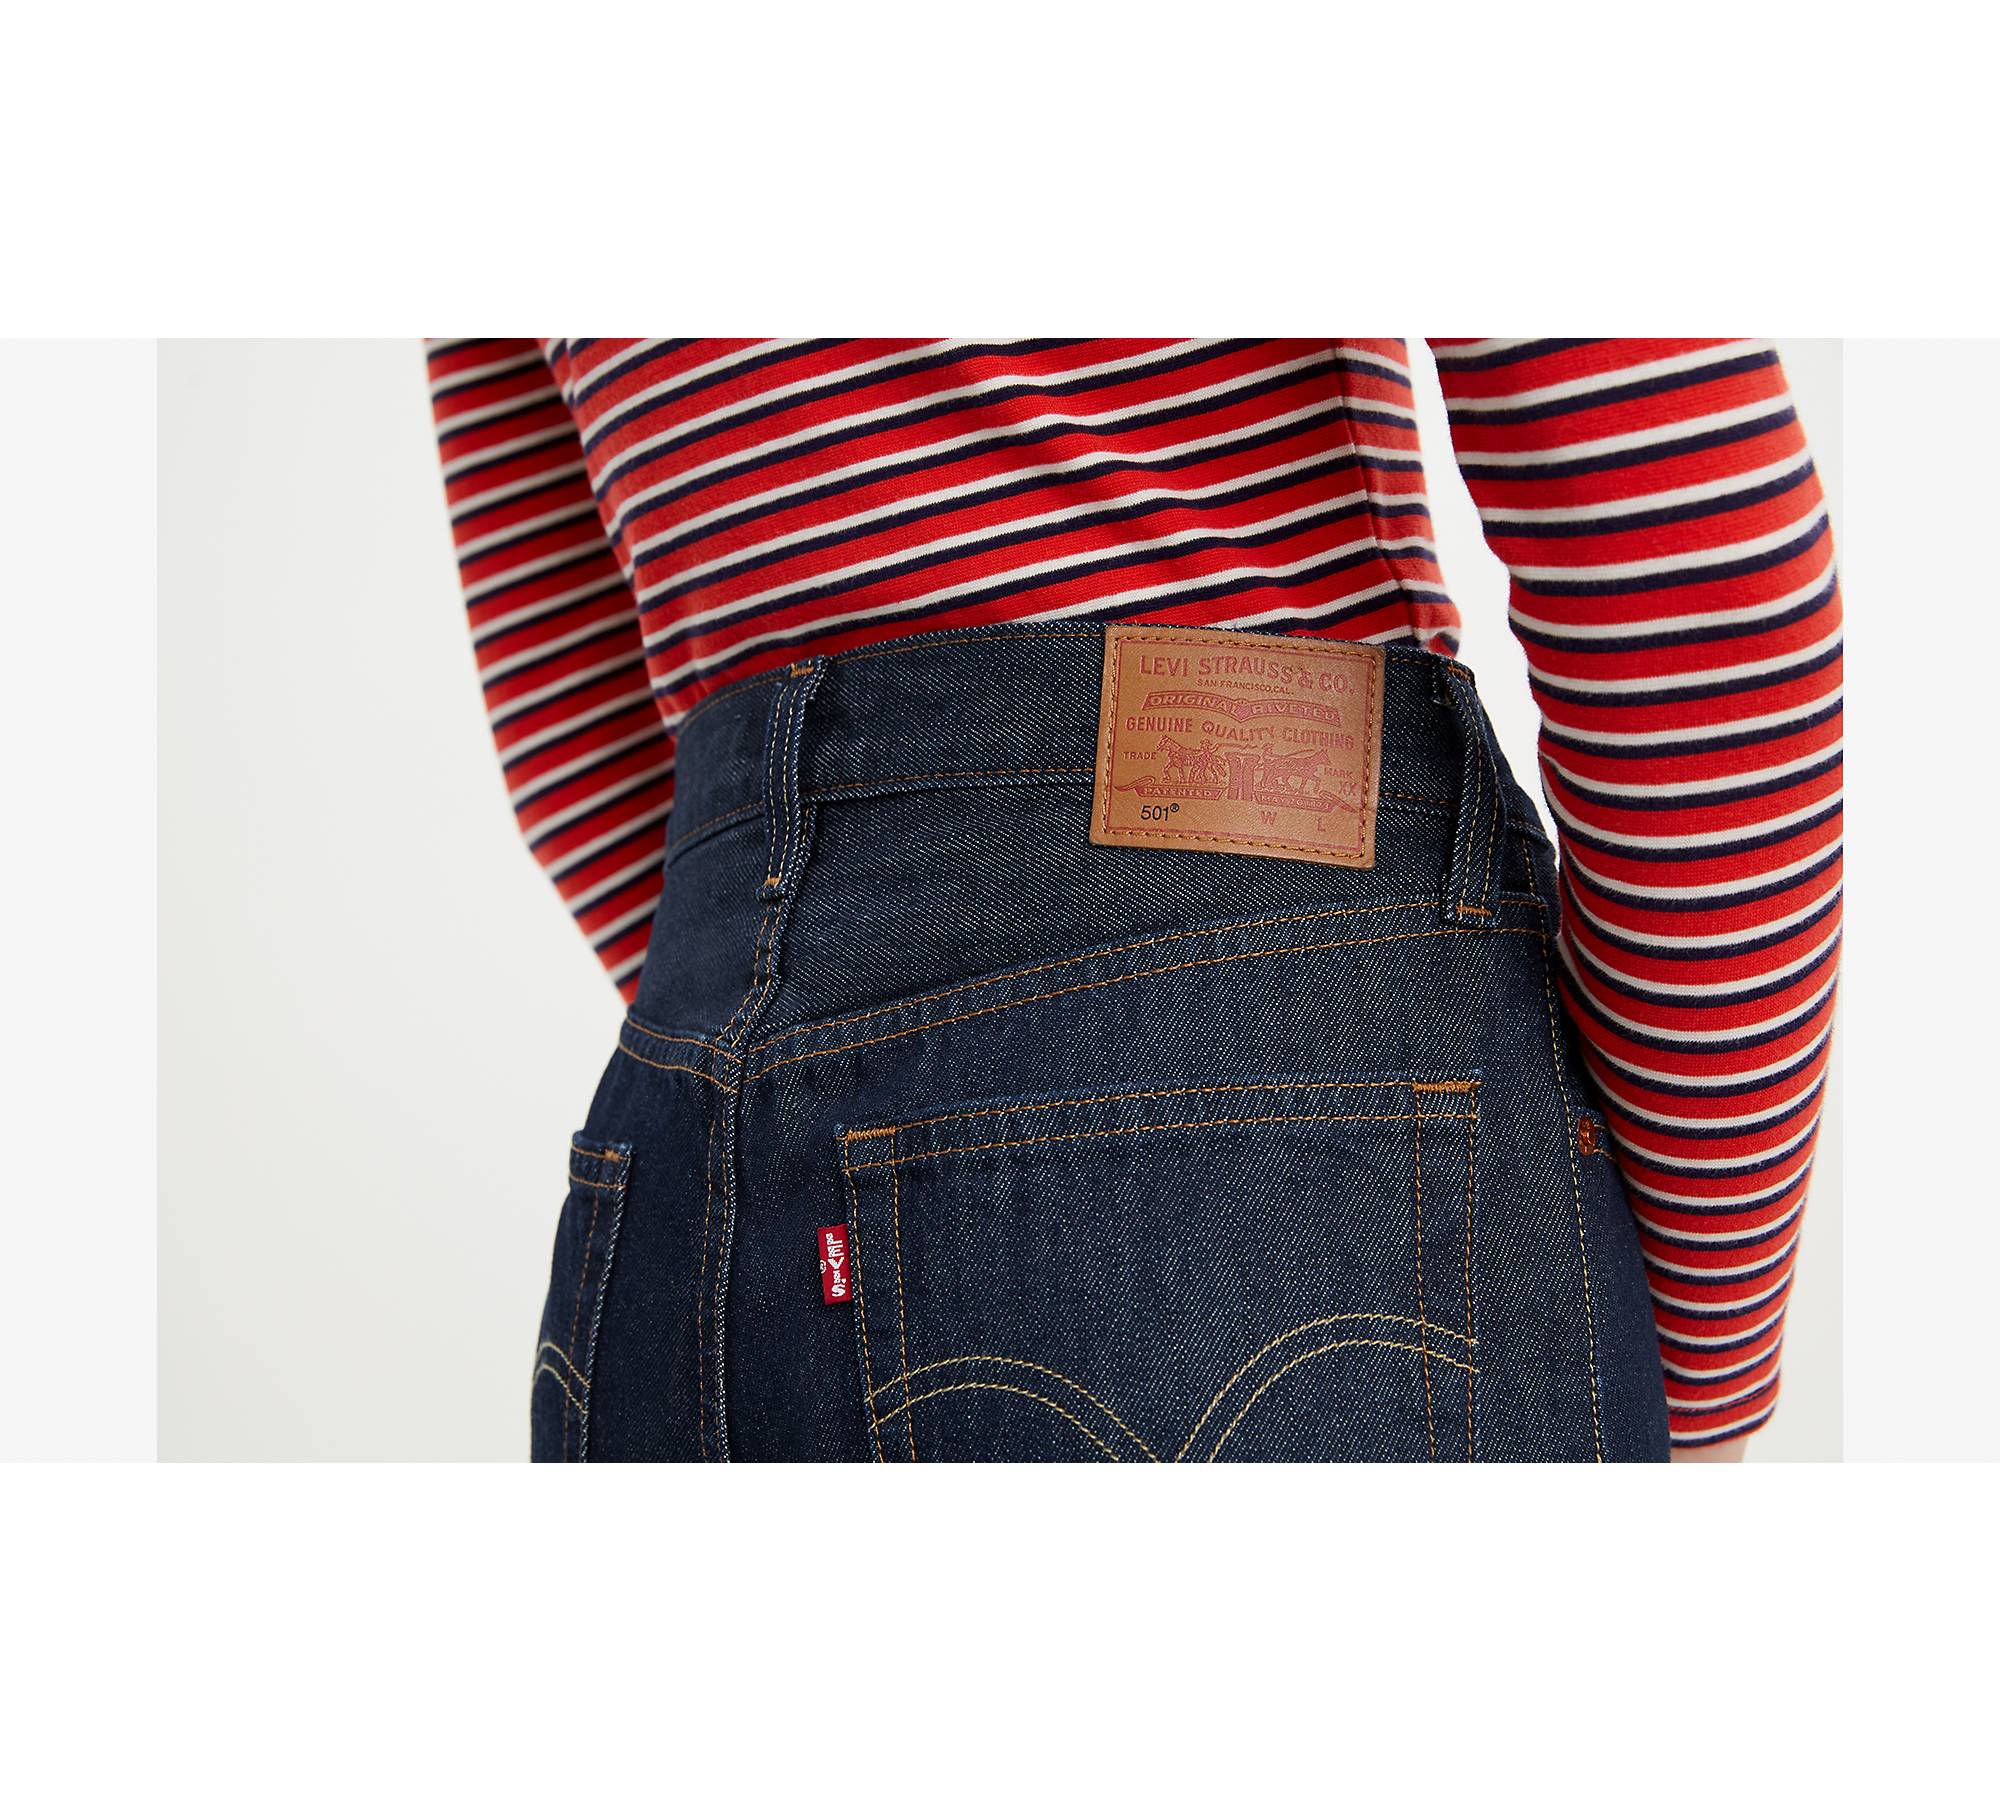 Jeans Mujer Levi's 501 Original Fit 12501-0395